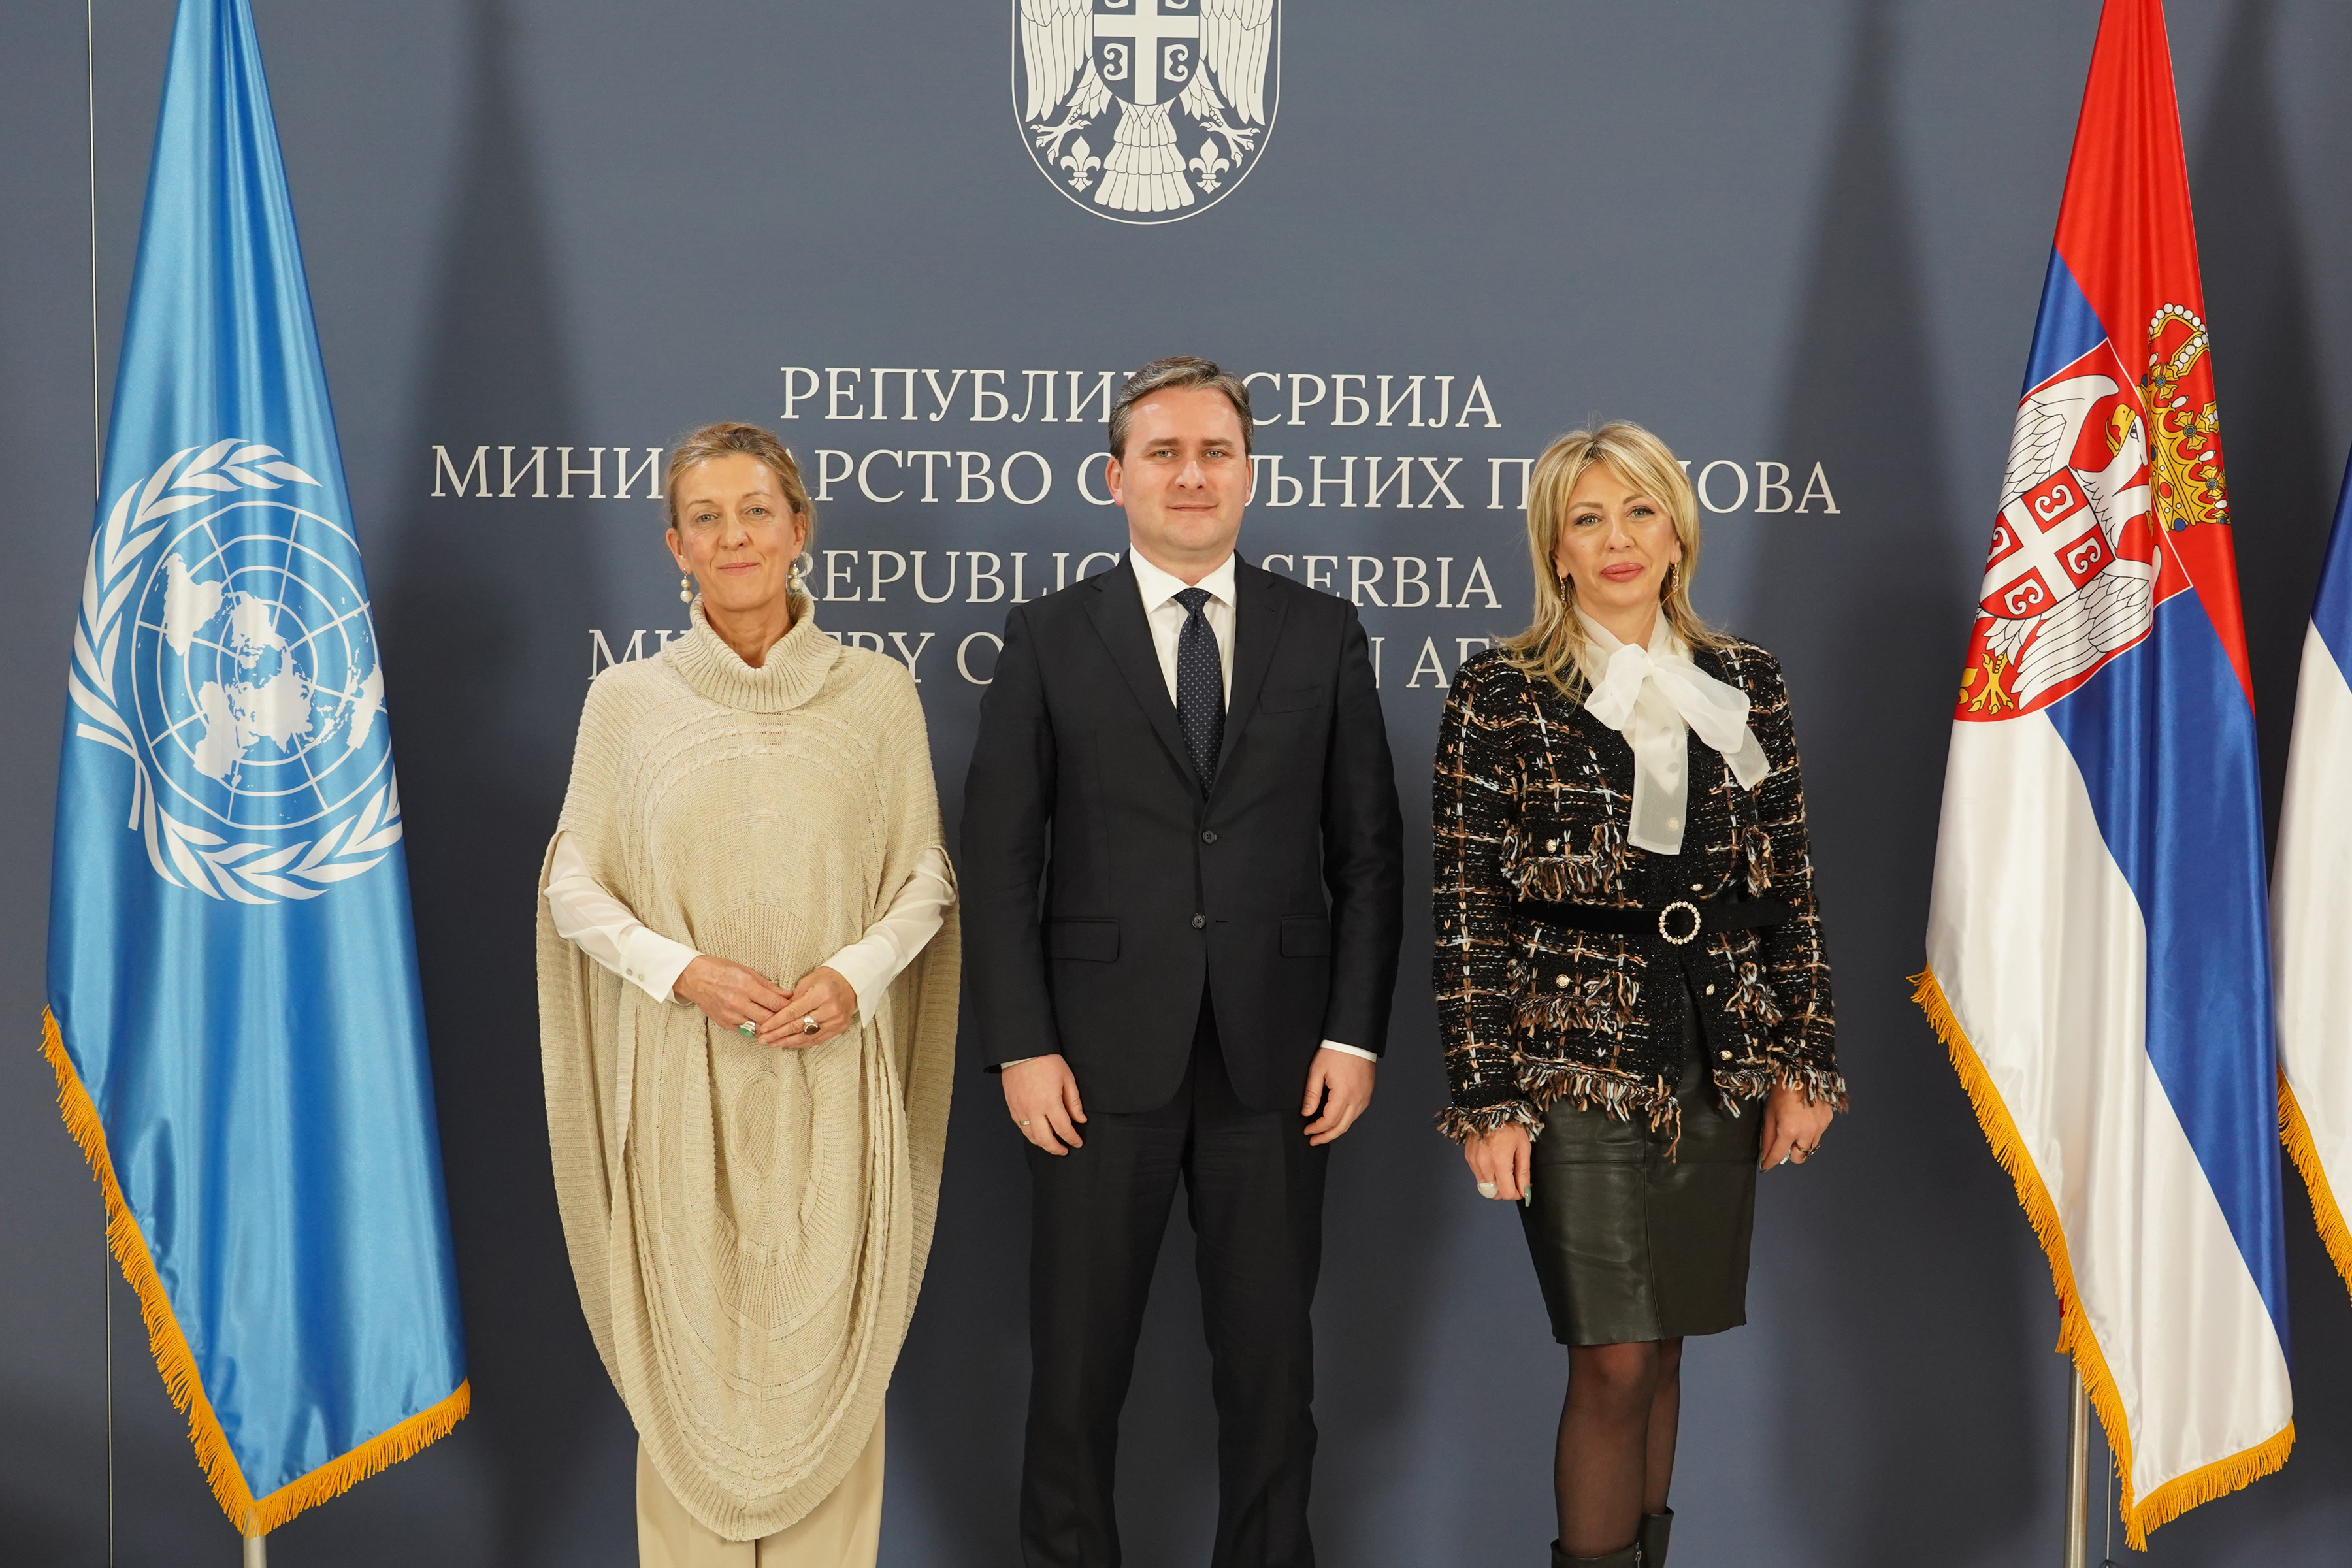 Serbia and the UN strengthen cooperation towards sustainable development